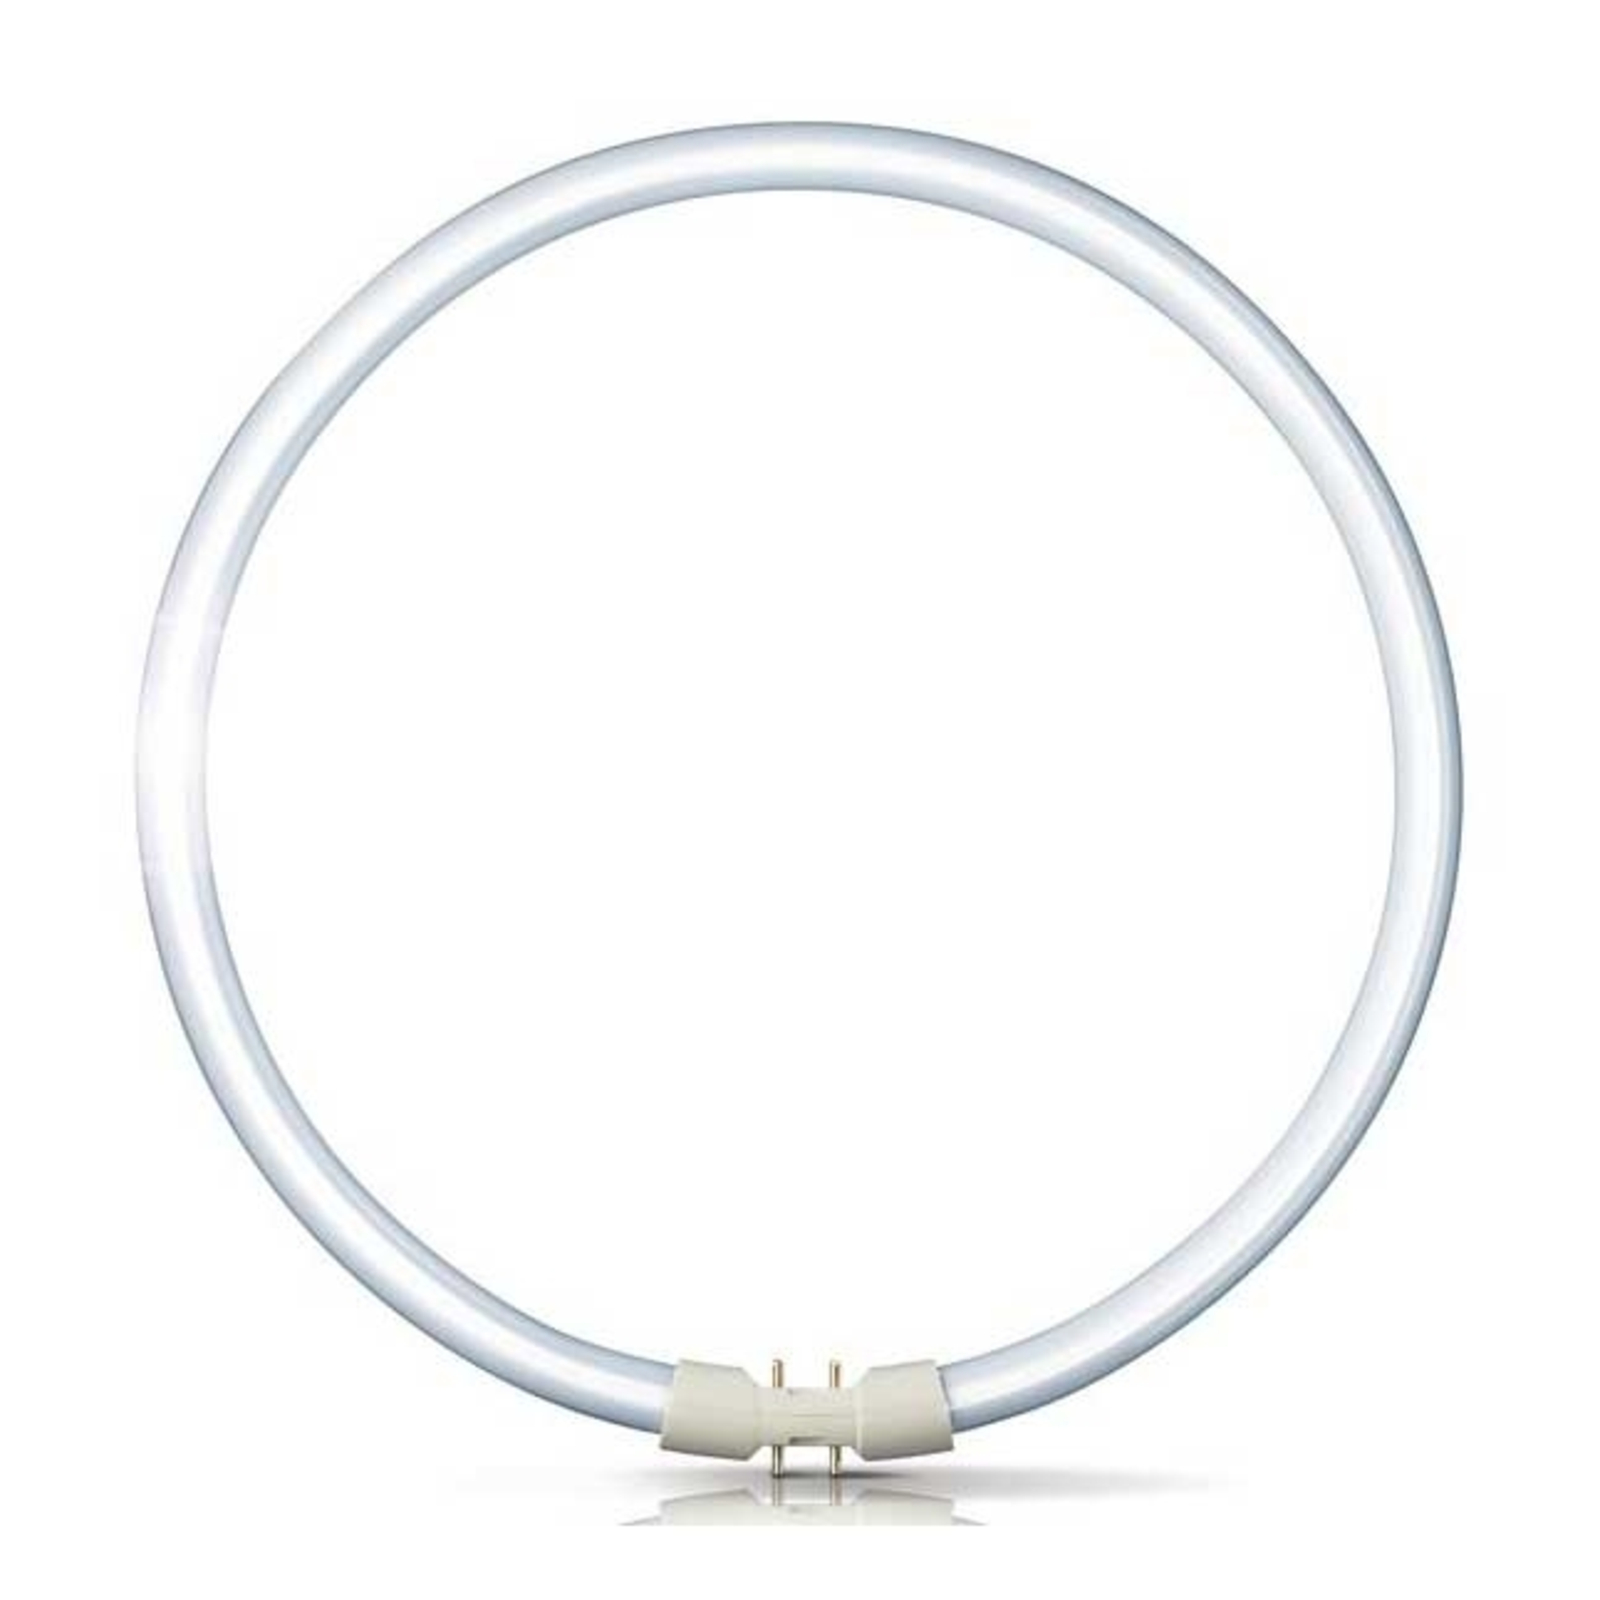 2GX13 55W 840 Ring-Leuchtstofflampe Master TL5